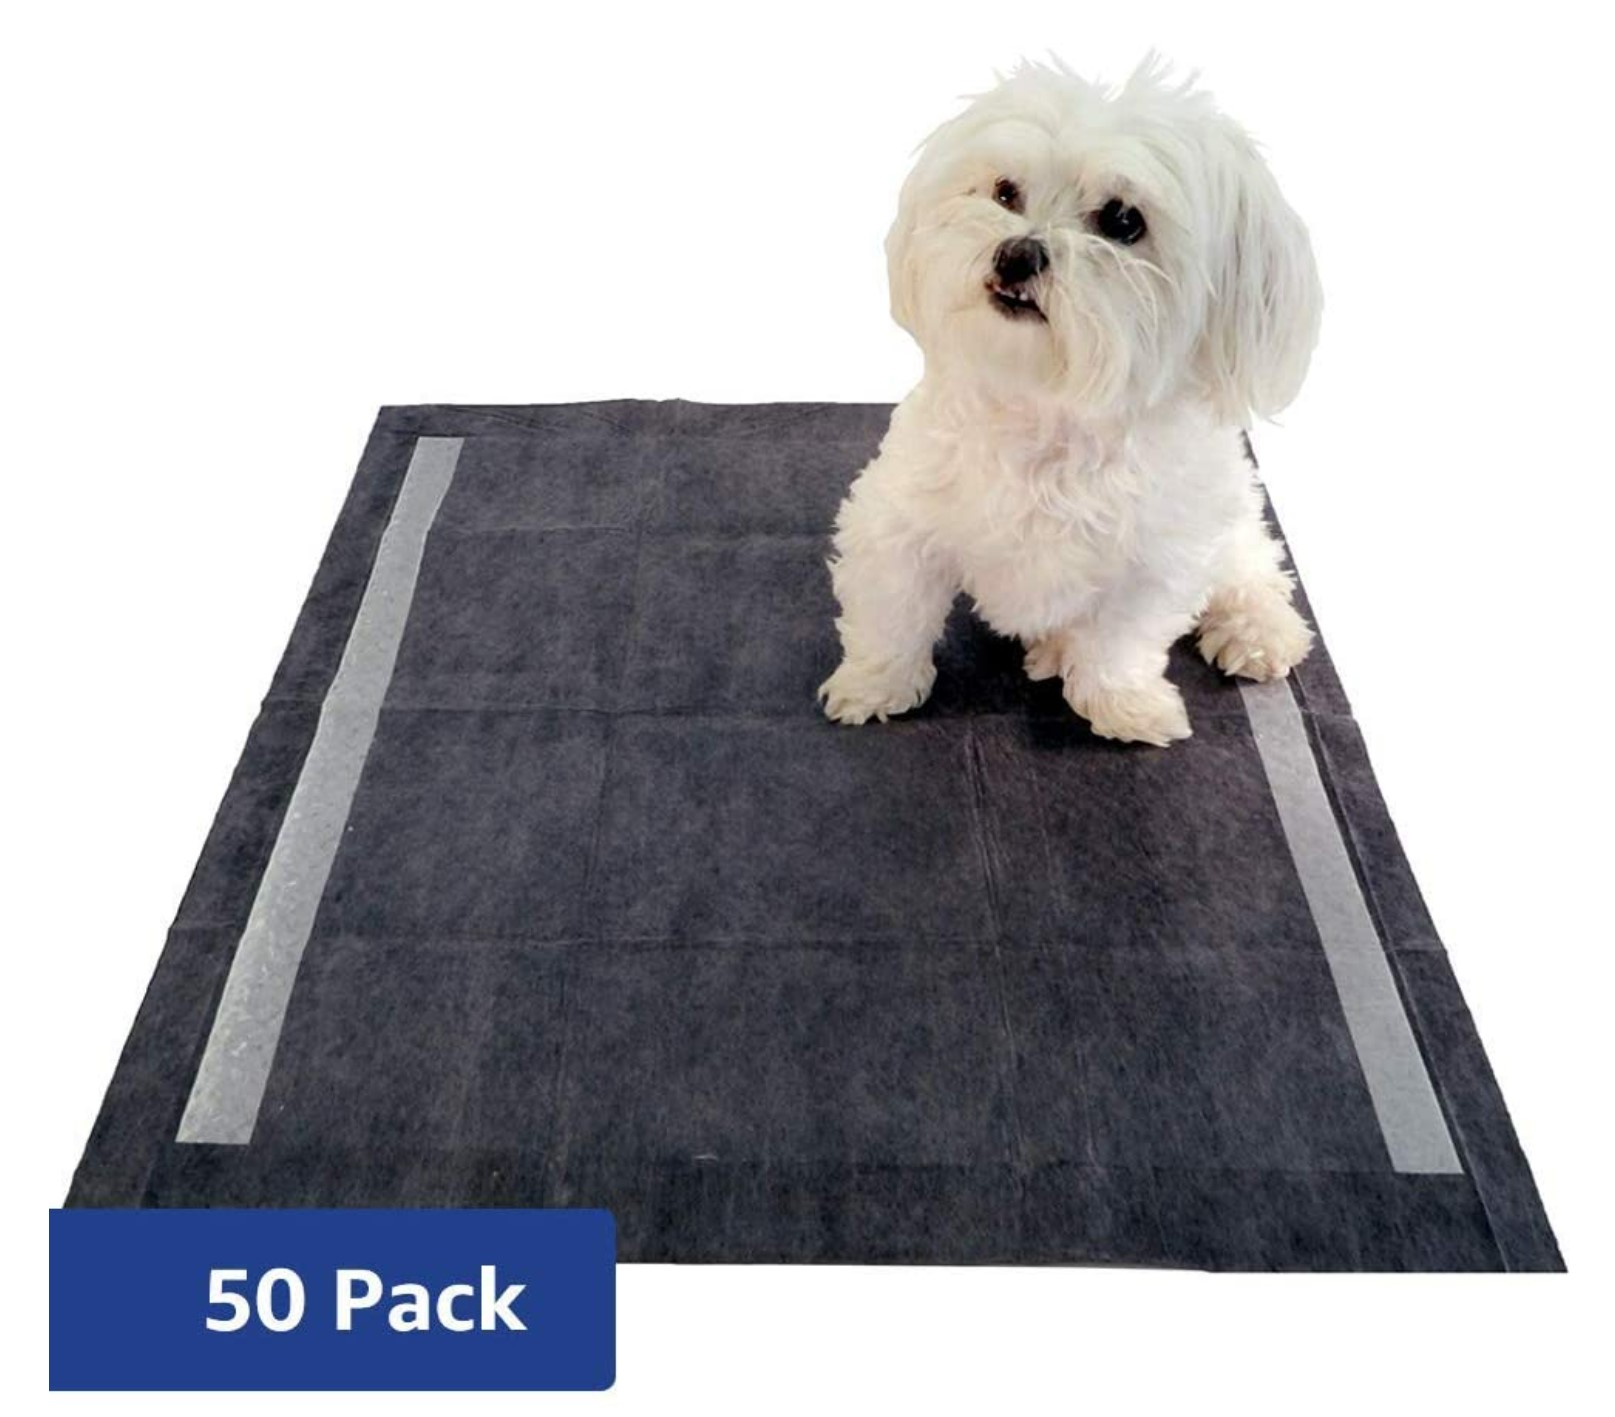 Non-slip Pet Playpen Floor Mat, Rug Playmat for Rabbits, Cats, Dogs.  Premium Playpen Floor Mat for Rabbits Soft and Safe Surface for Pets 